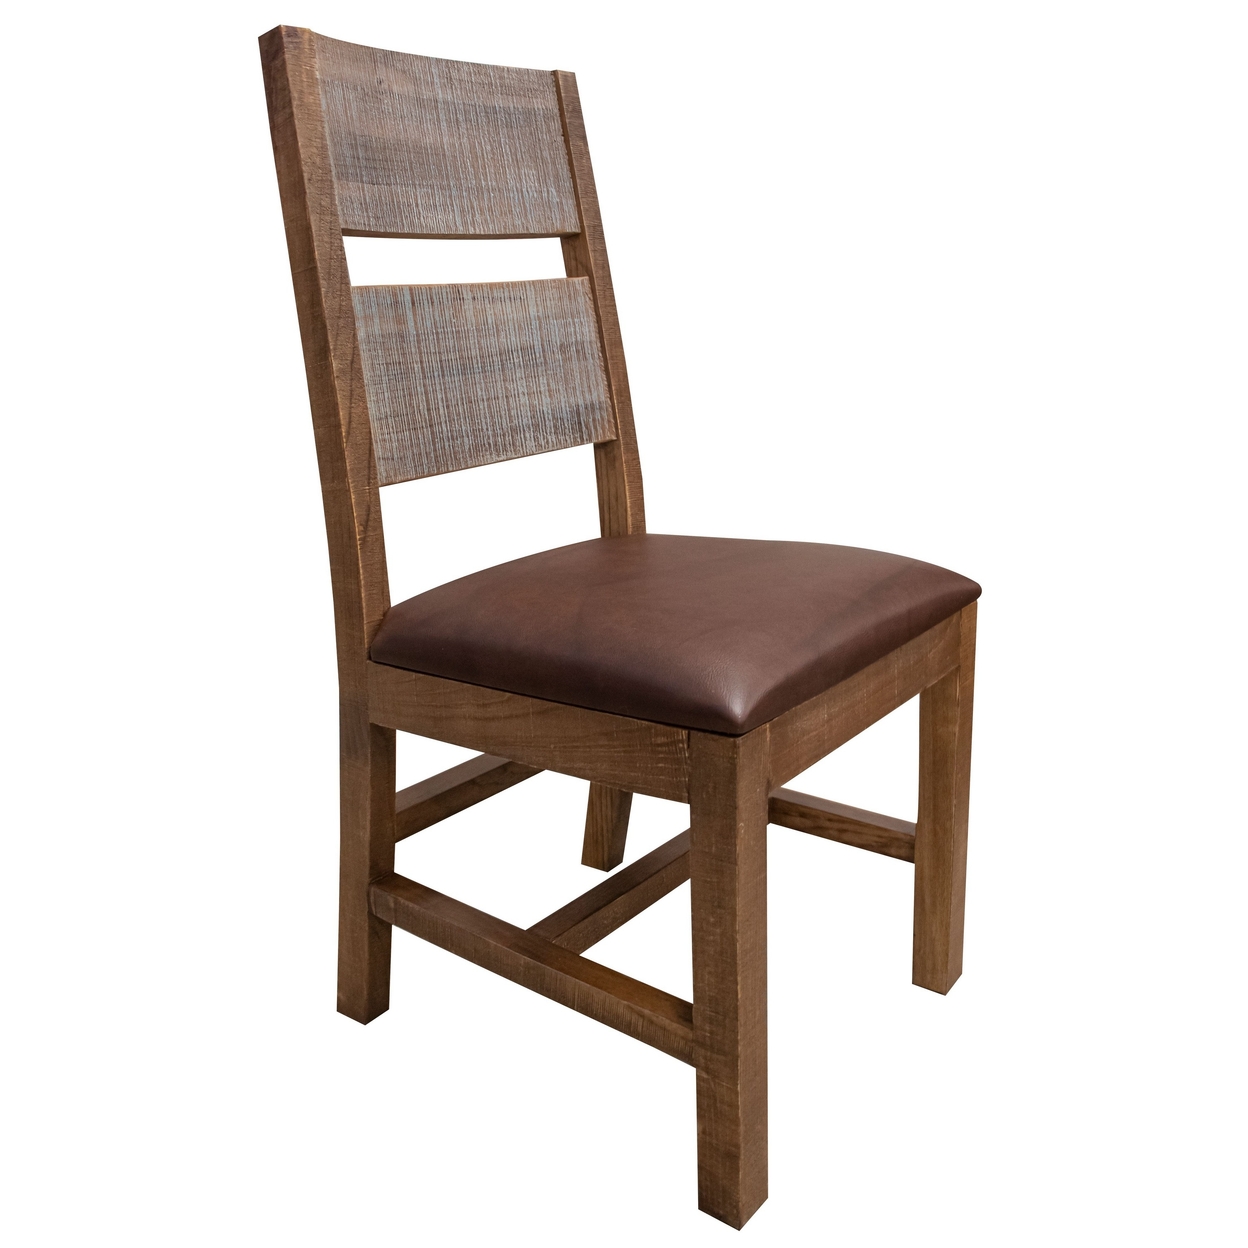 Fena 22 Inch Dining Chair, Set Of 2, Brown Faux Leather Seat, Pine Wood- Saltoro Sherpi